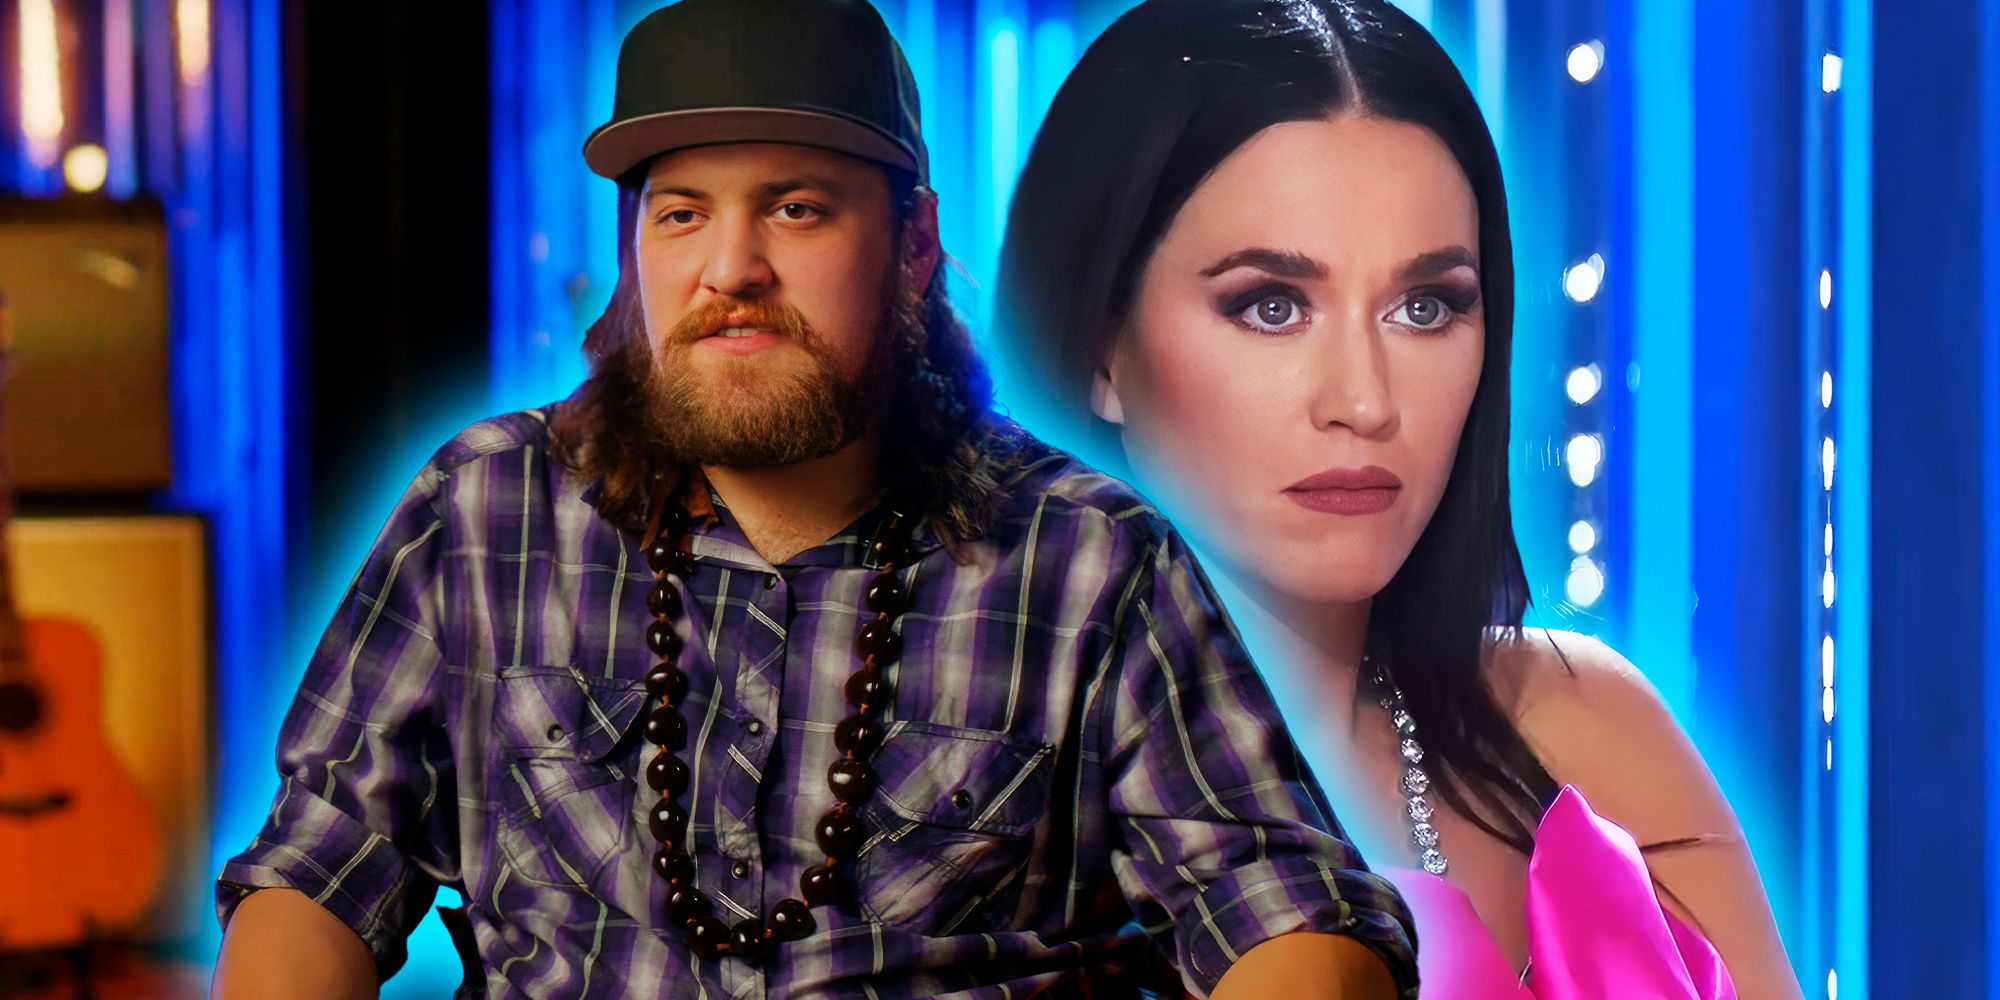 American Idol's Oliver Steele and Katy Perry looking serious